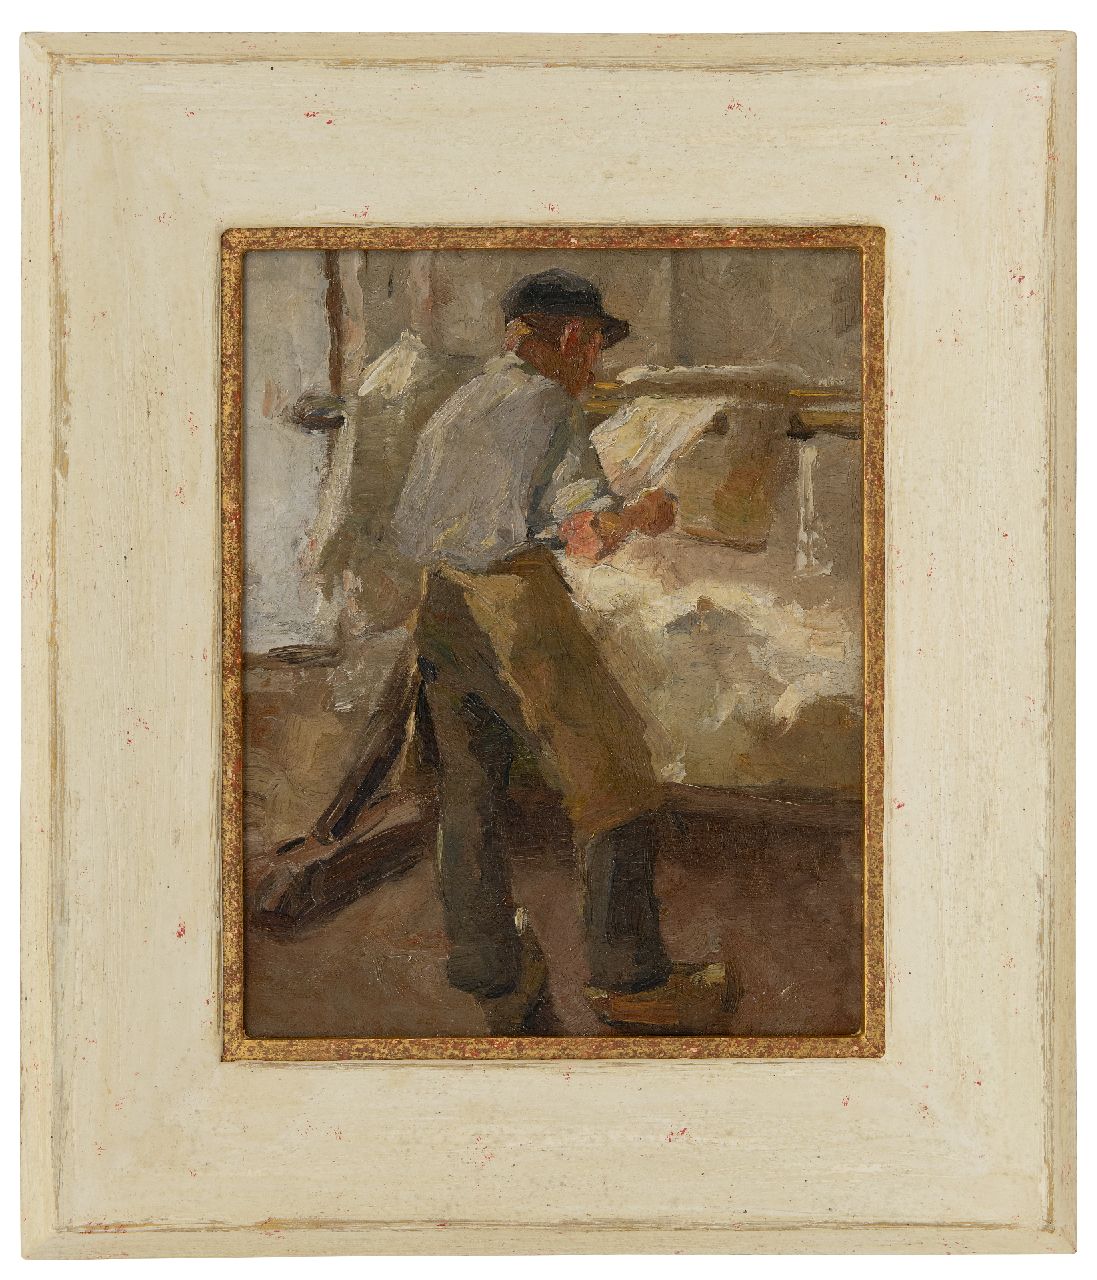 Rappard A.G.A. van | 'Anthon' Gerhard Alexander van Rappard | Paintings offered for sale | Young workman at a stretching frame, oil on canvas 33.1 x 26.3 cm, painted ca. 1890-1891